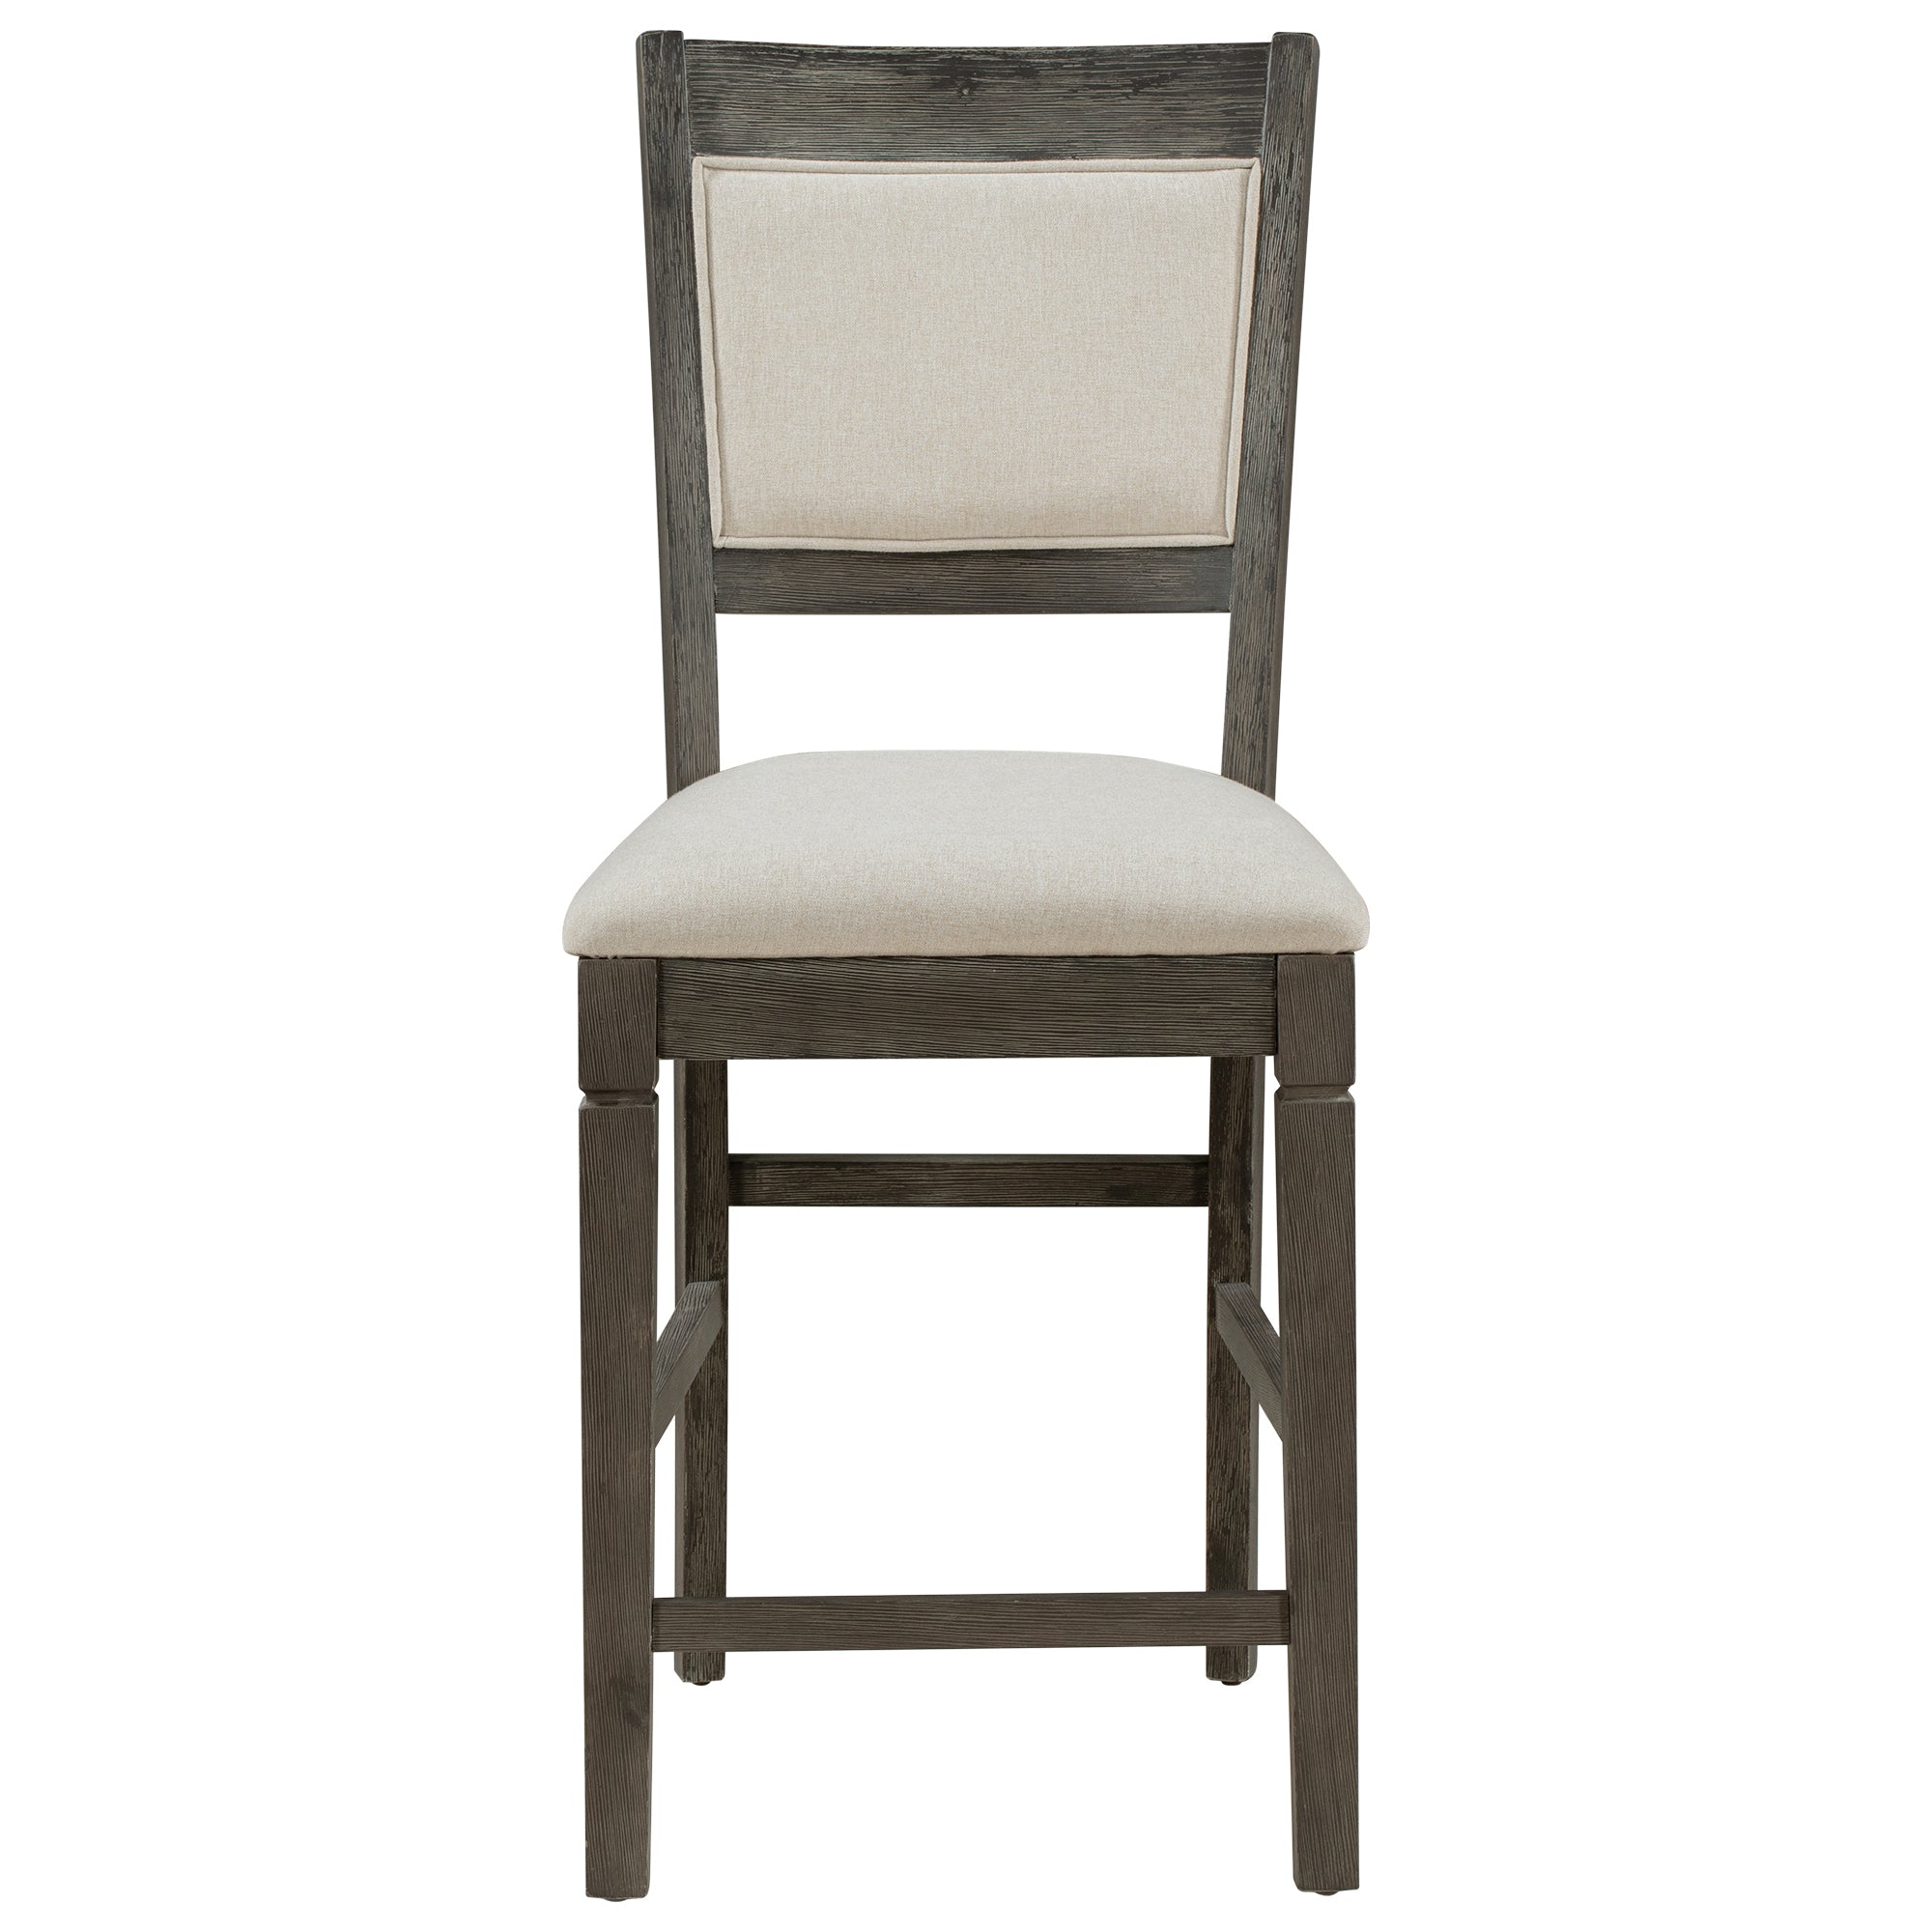 4 Upholstered Chairs